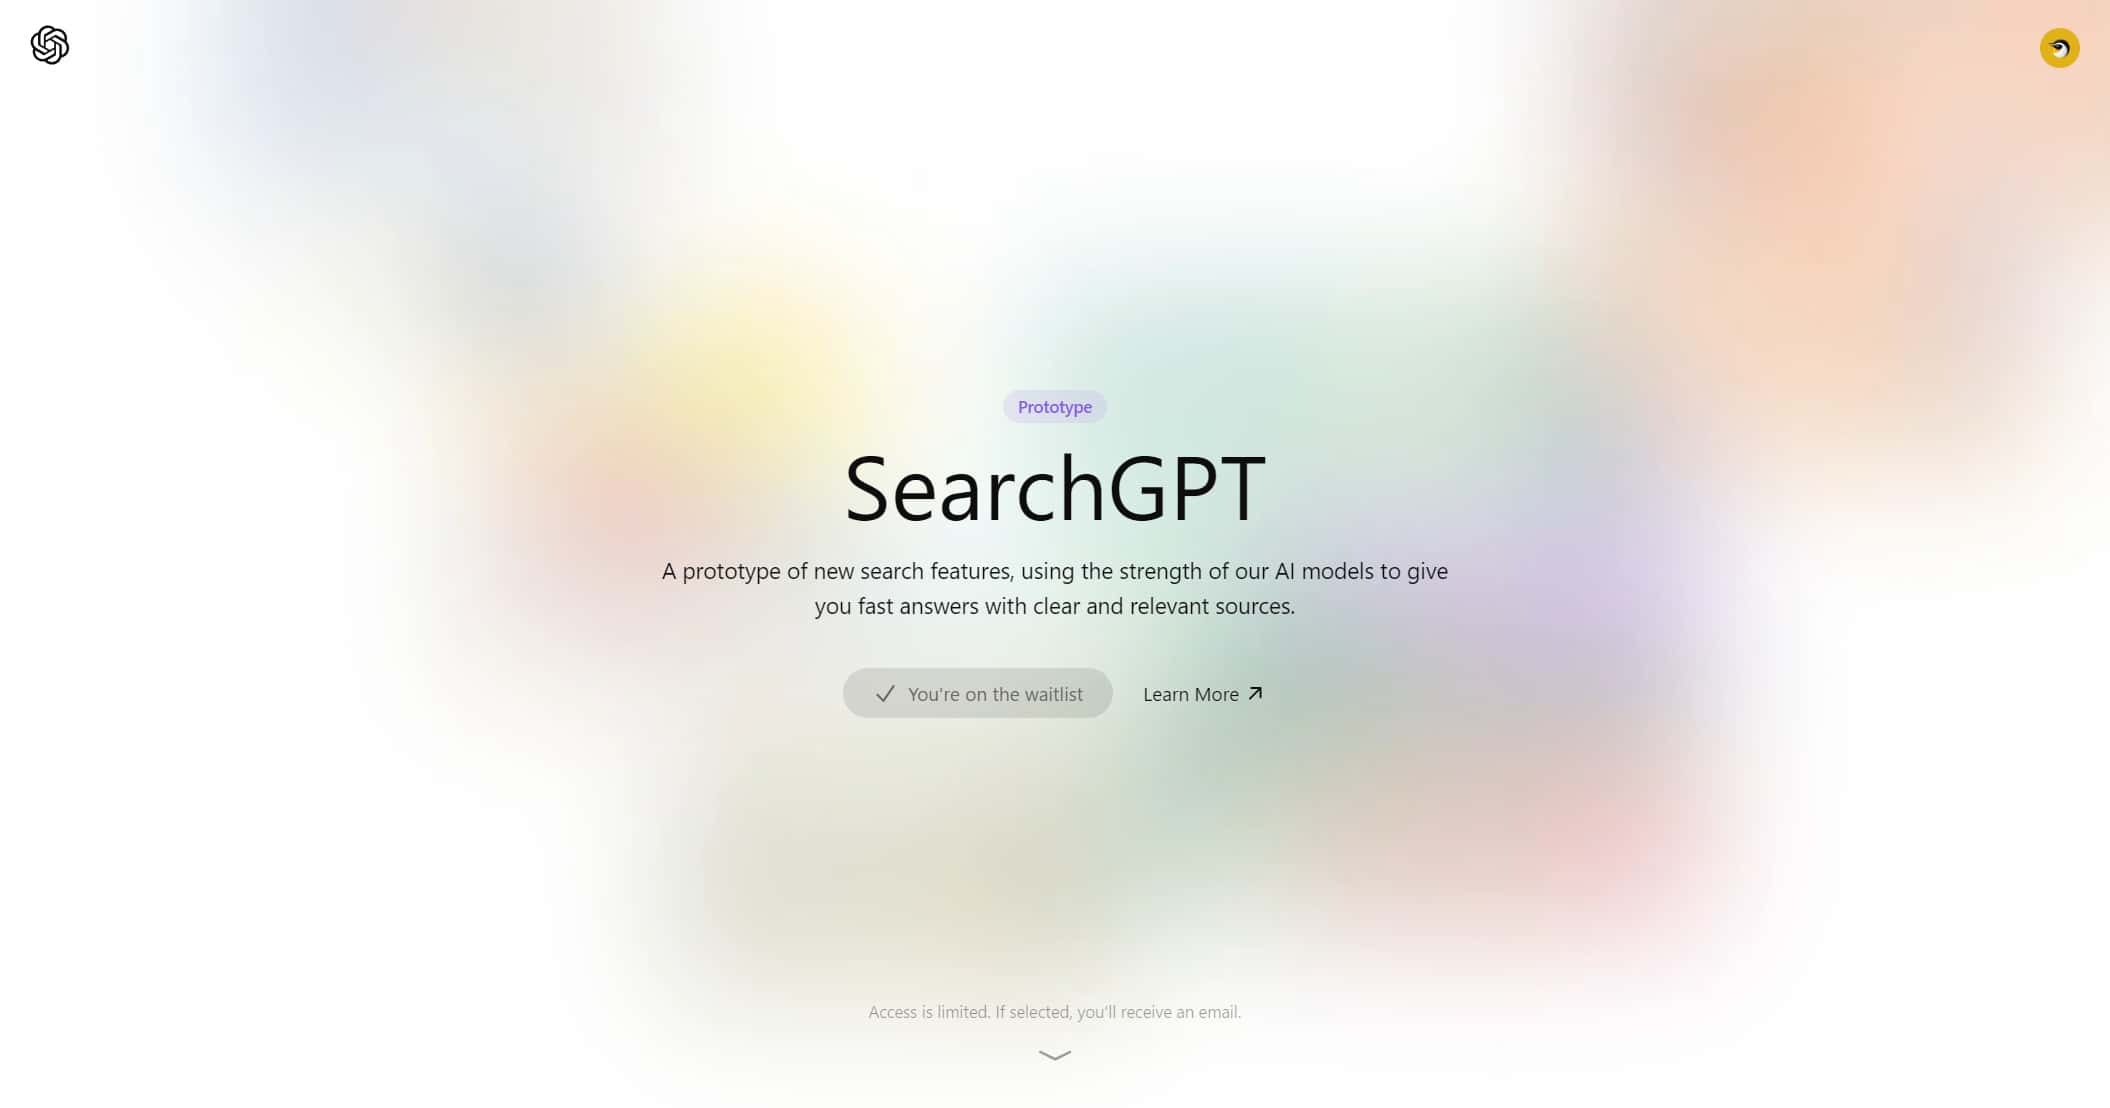 SearchGPT-using the strength of our AI models Tool to give you fast answers with clear and relevant sources.